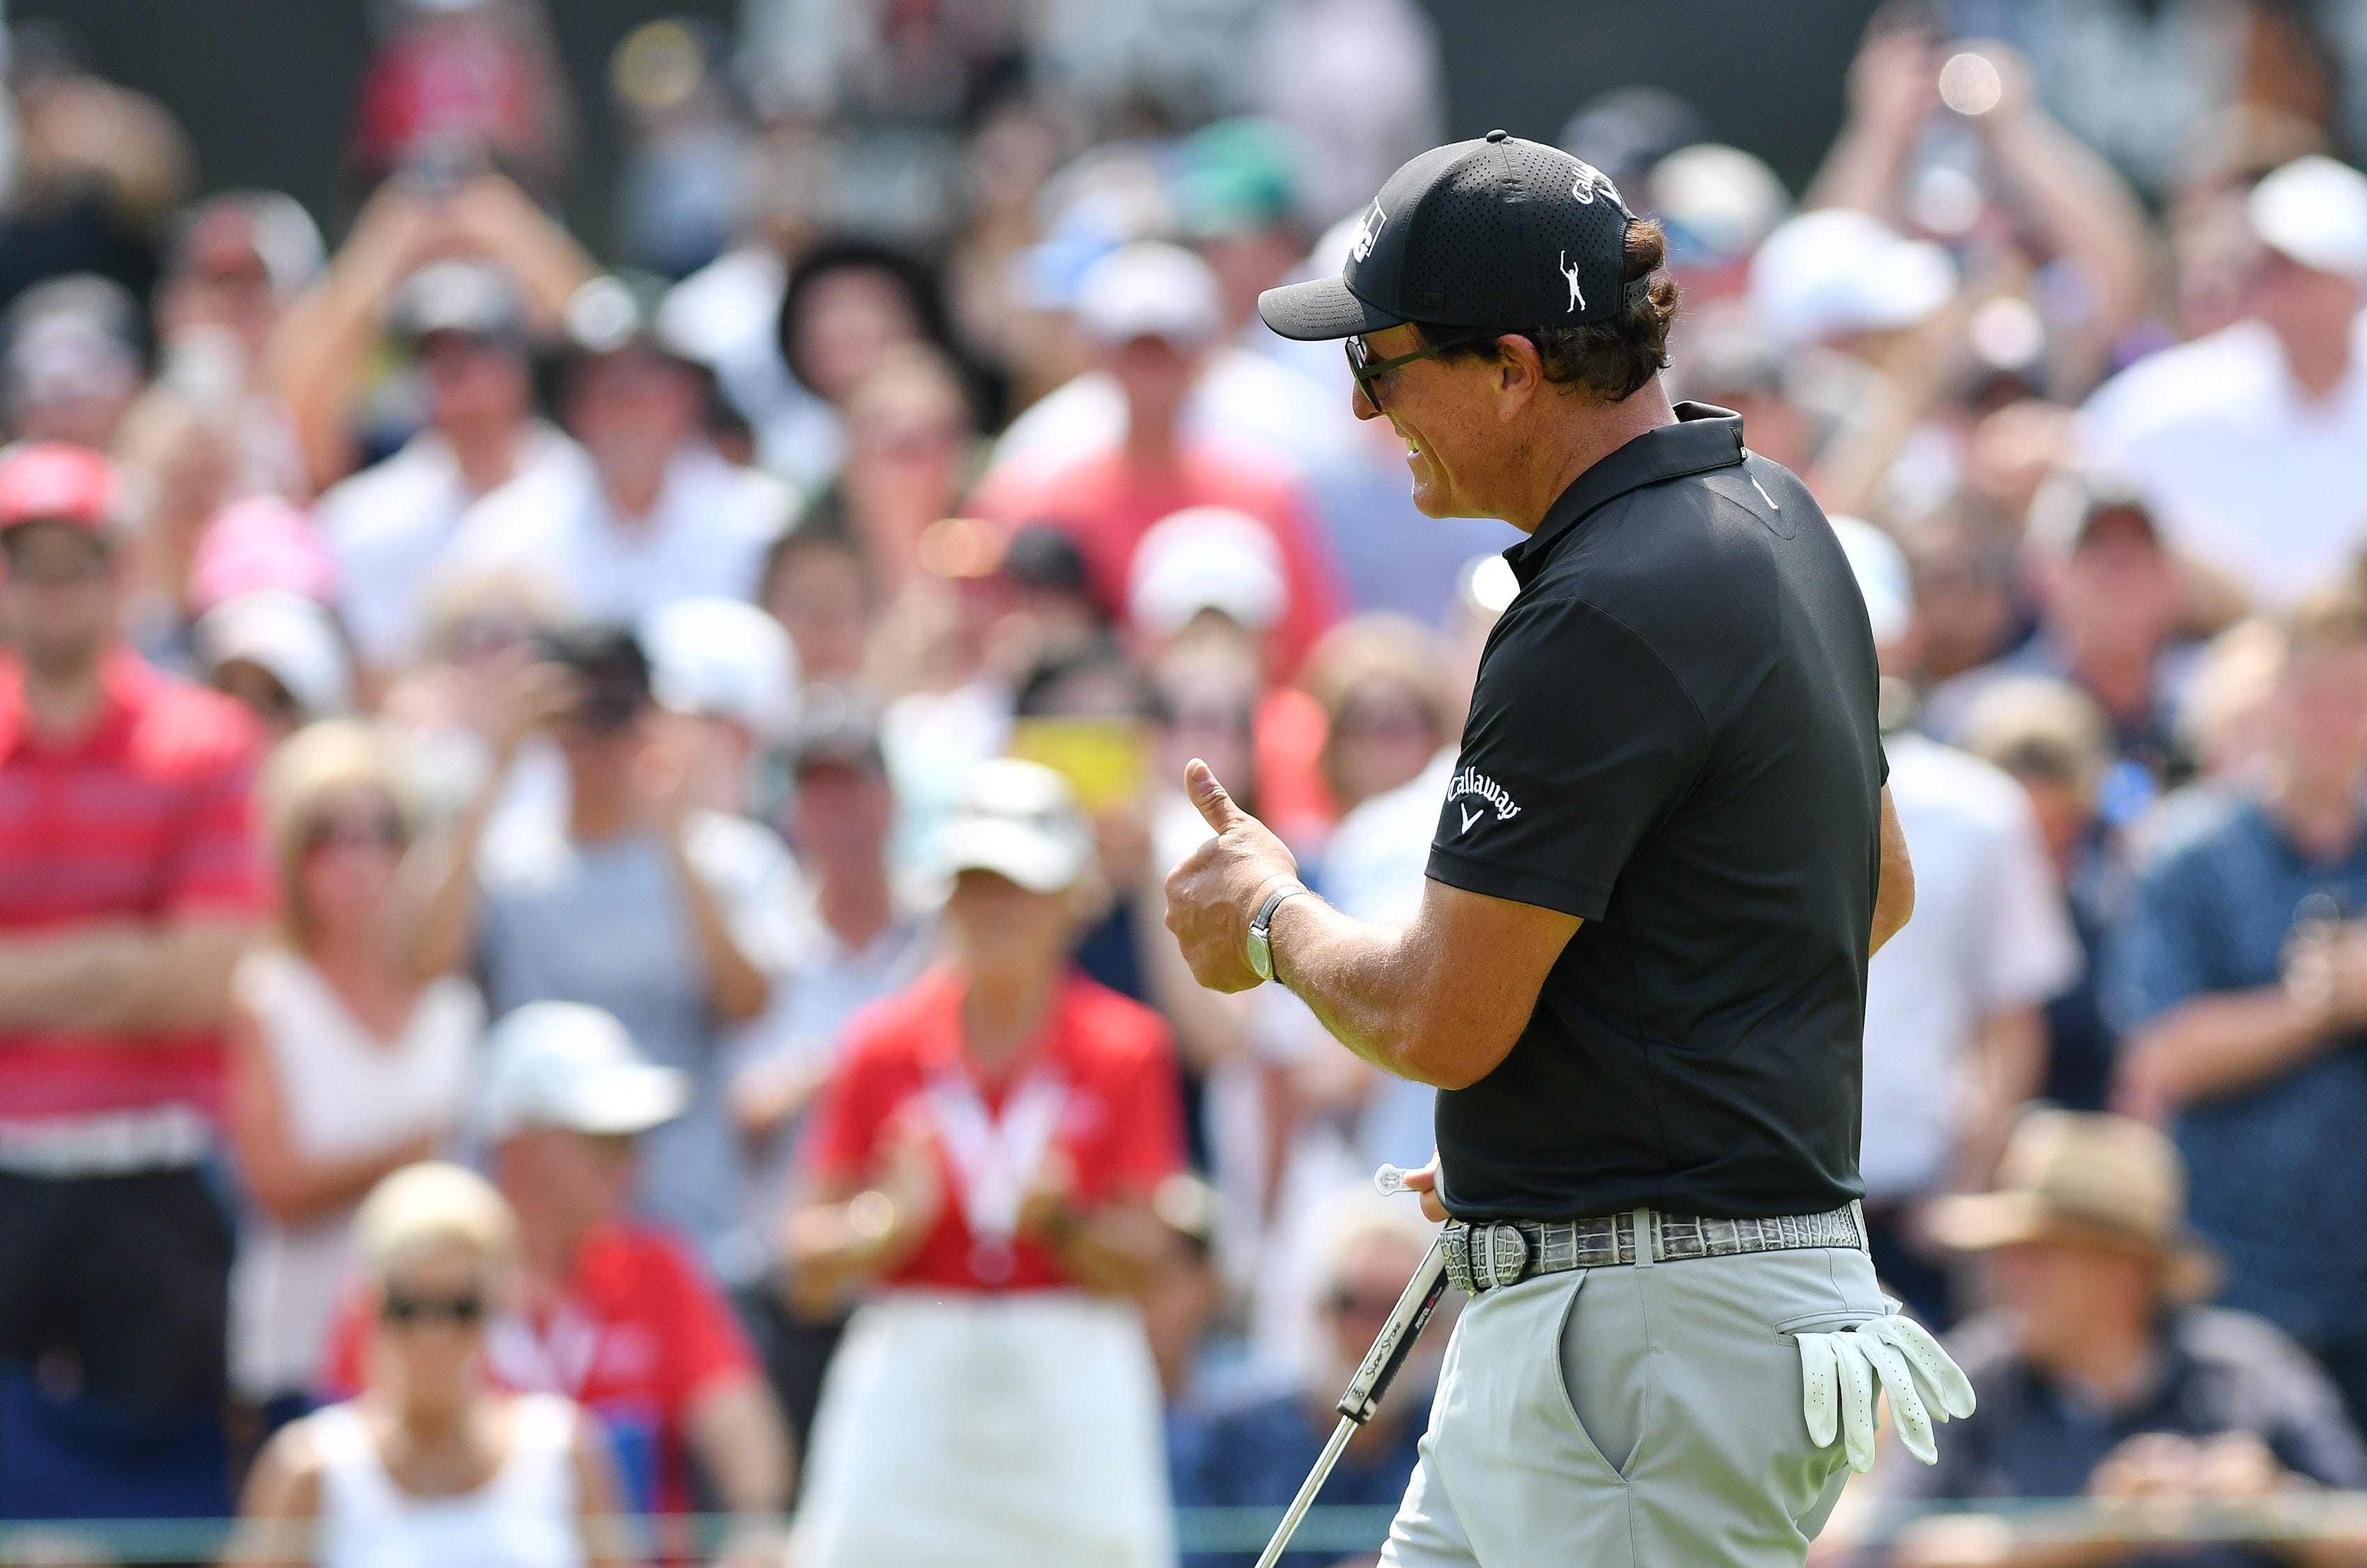 Phil Mickelson gives a thumbs-up on the 18th green at the 2021 Rocket Mortgage Classic.